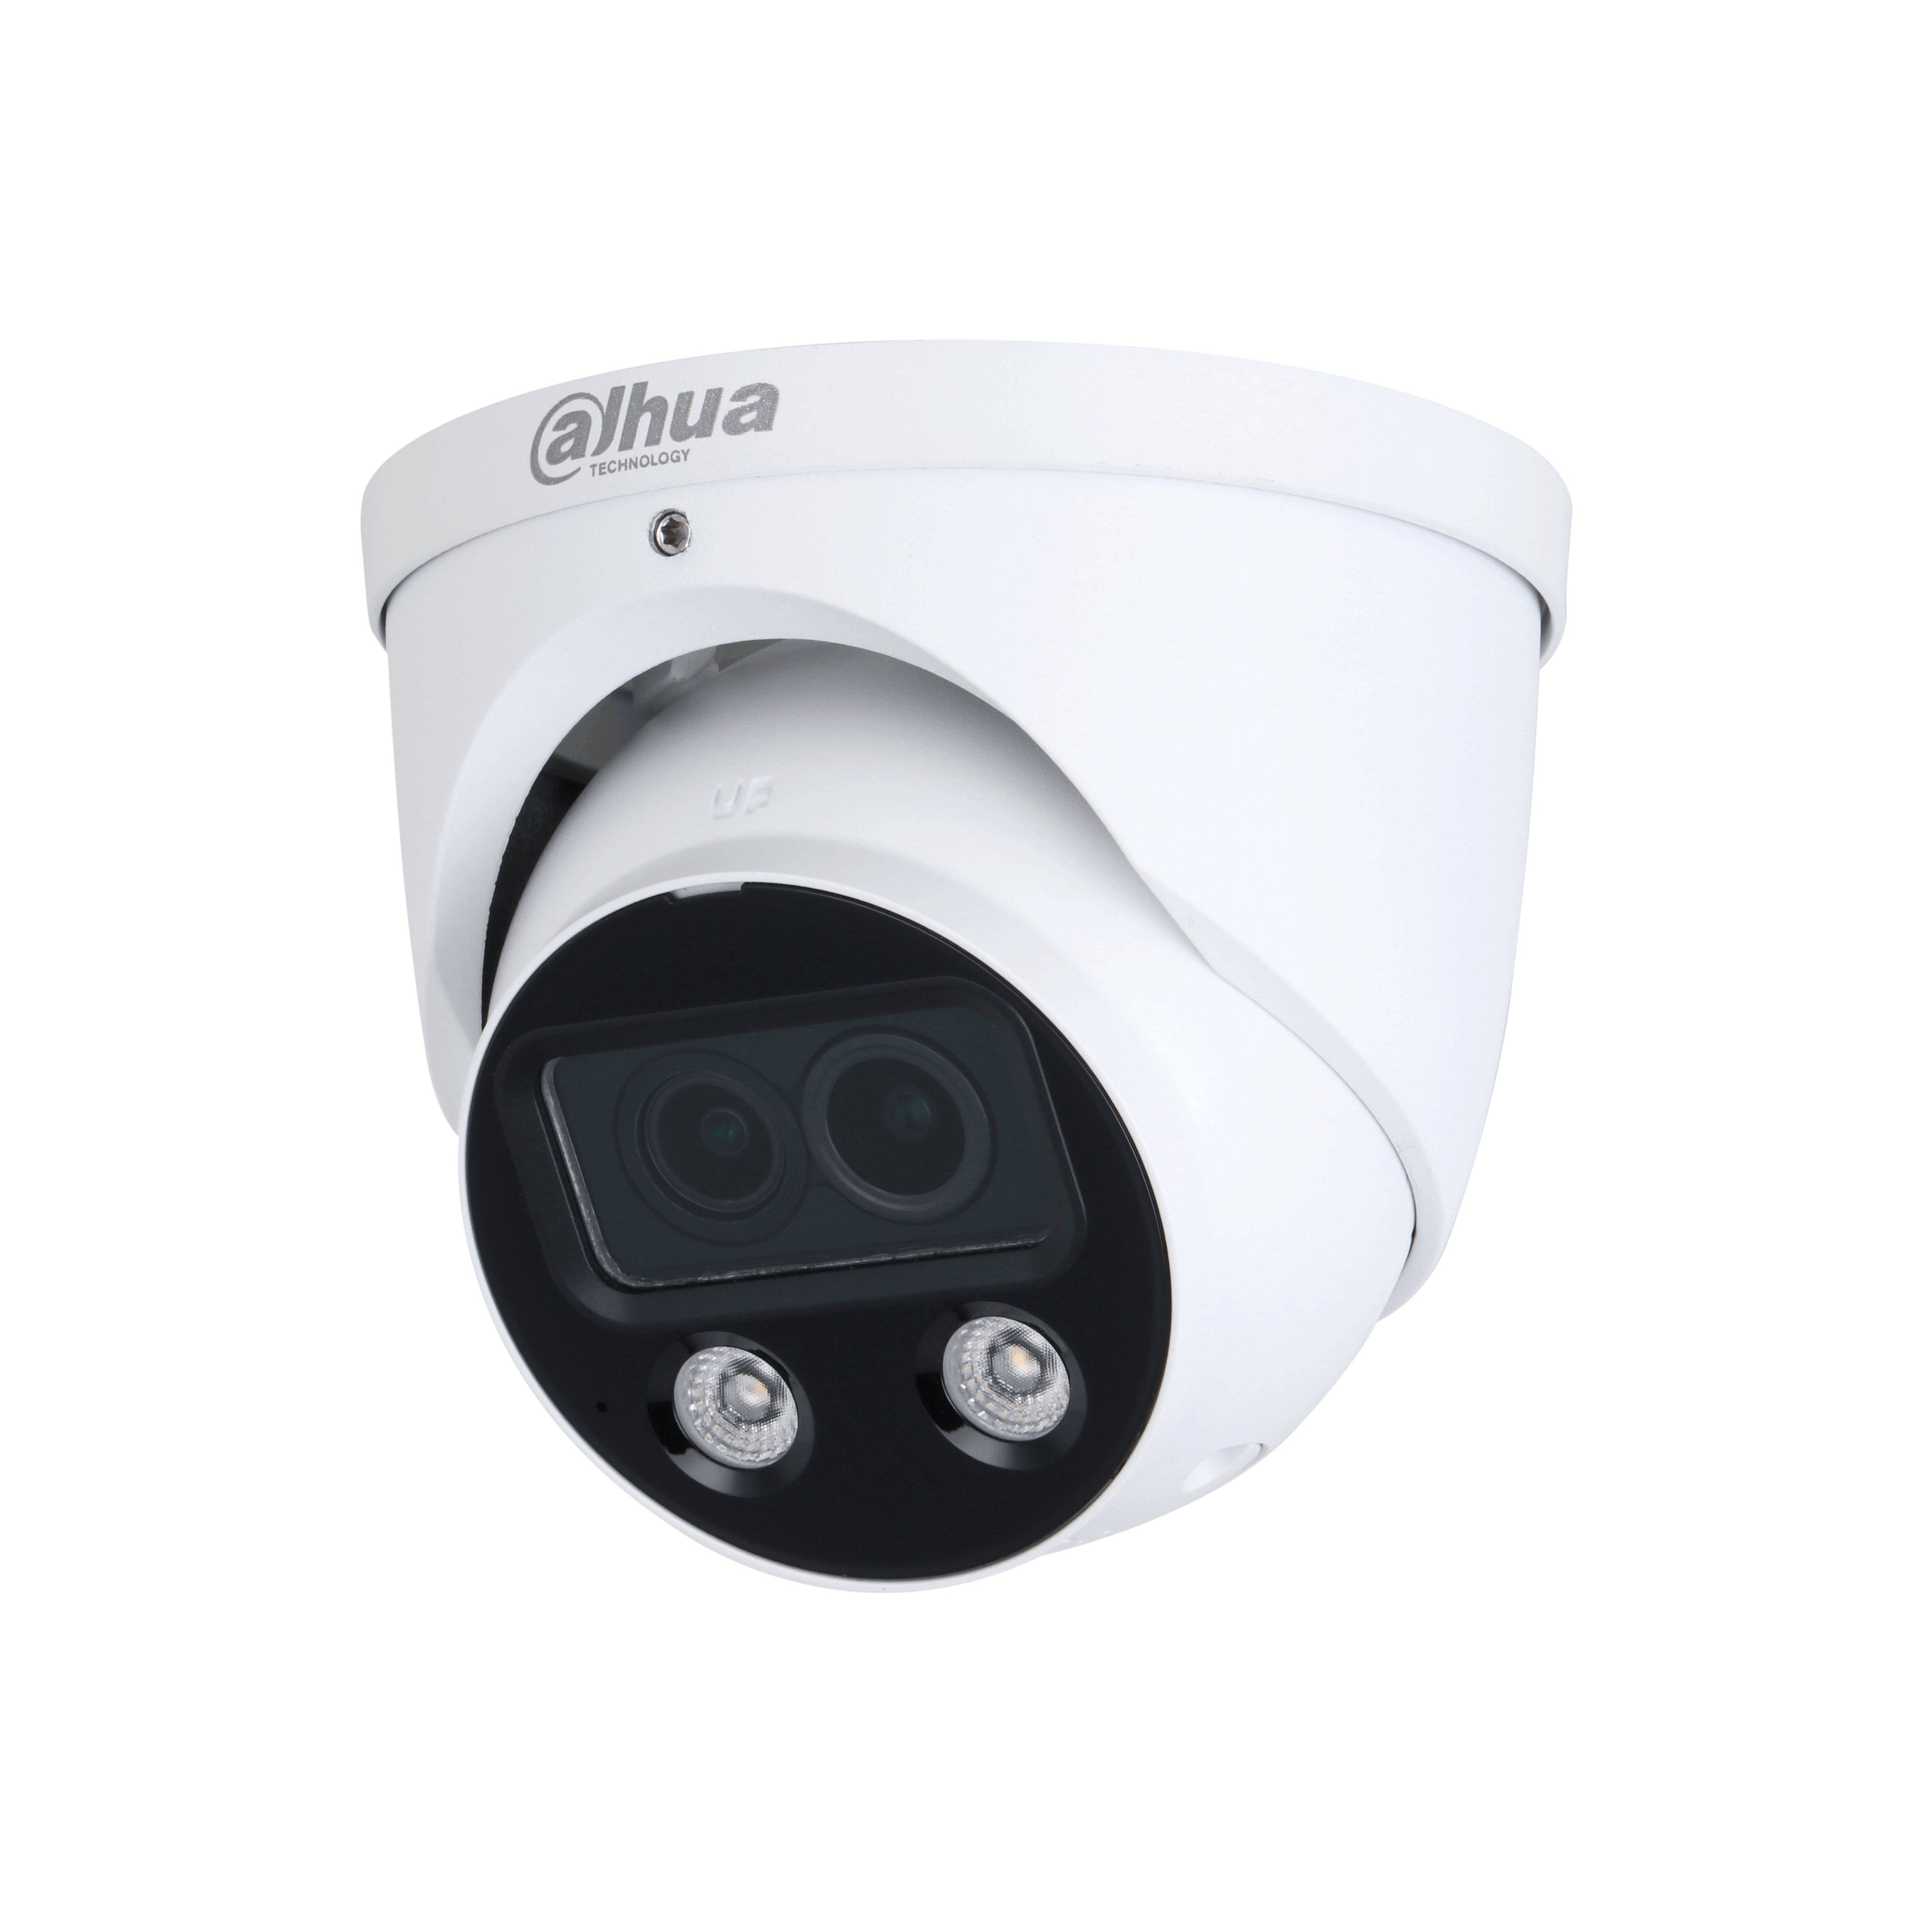 WIZMIND SERIES IP CAMERA WHITE DUAL AI PEOPLE COUNT 4MP H.264/4+/5/5+ TURRET DIGITAL WDR METAL 2.8MM FIXED LENS FULL COLOUR IR+WHITE LED 50M EPOE IP67 BUILT IN MIC AUDIO IN AUDIO OUT 1 x ALARM IN 1 x ALARM OUT SUPPORT UP TO 256GB SD 12VDC